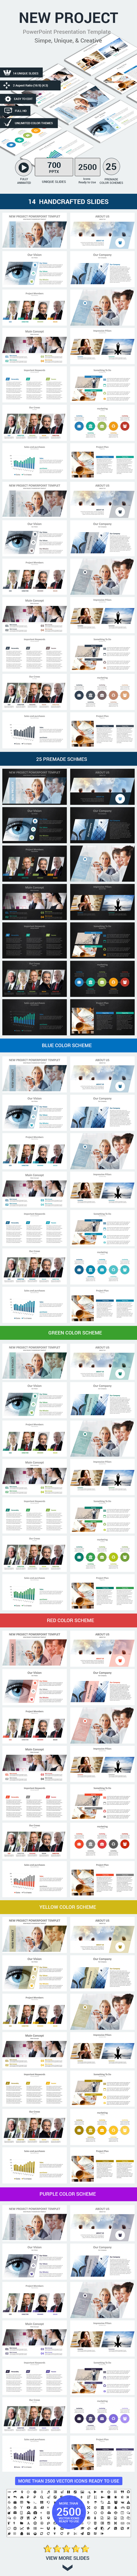 New Project PowerPoint Presentation Template